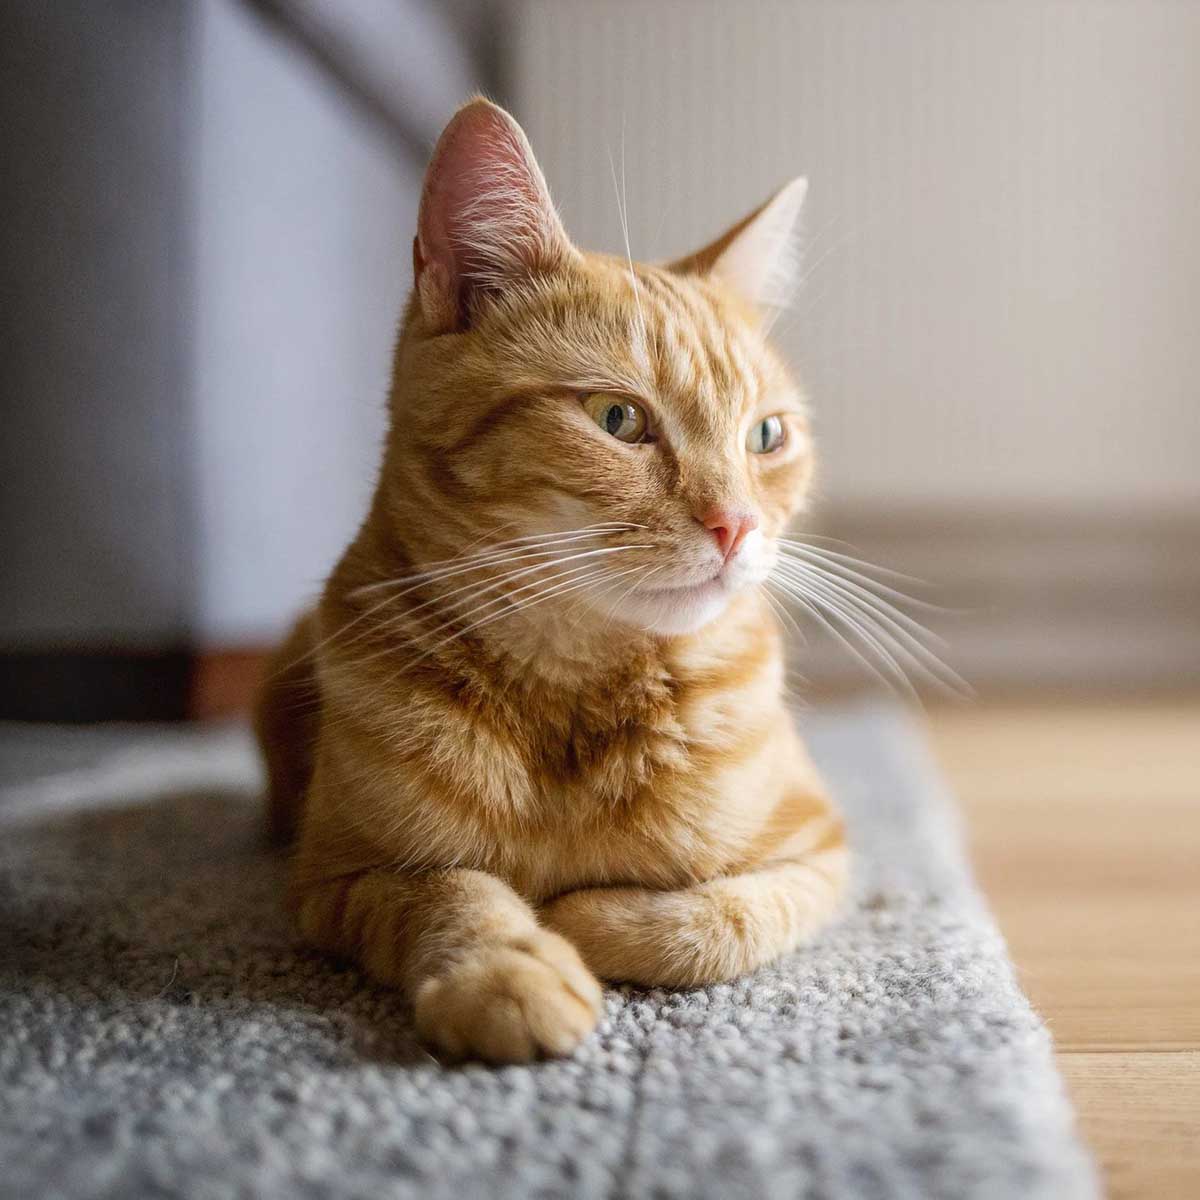 How To Stop Cats From Peeing On The Carpet